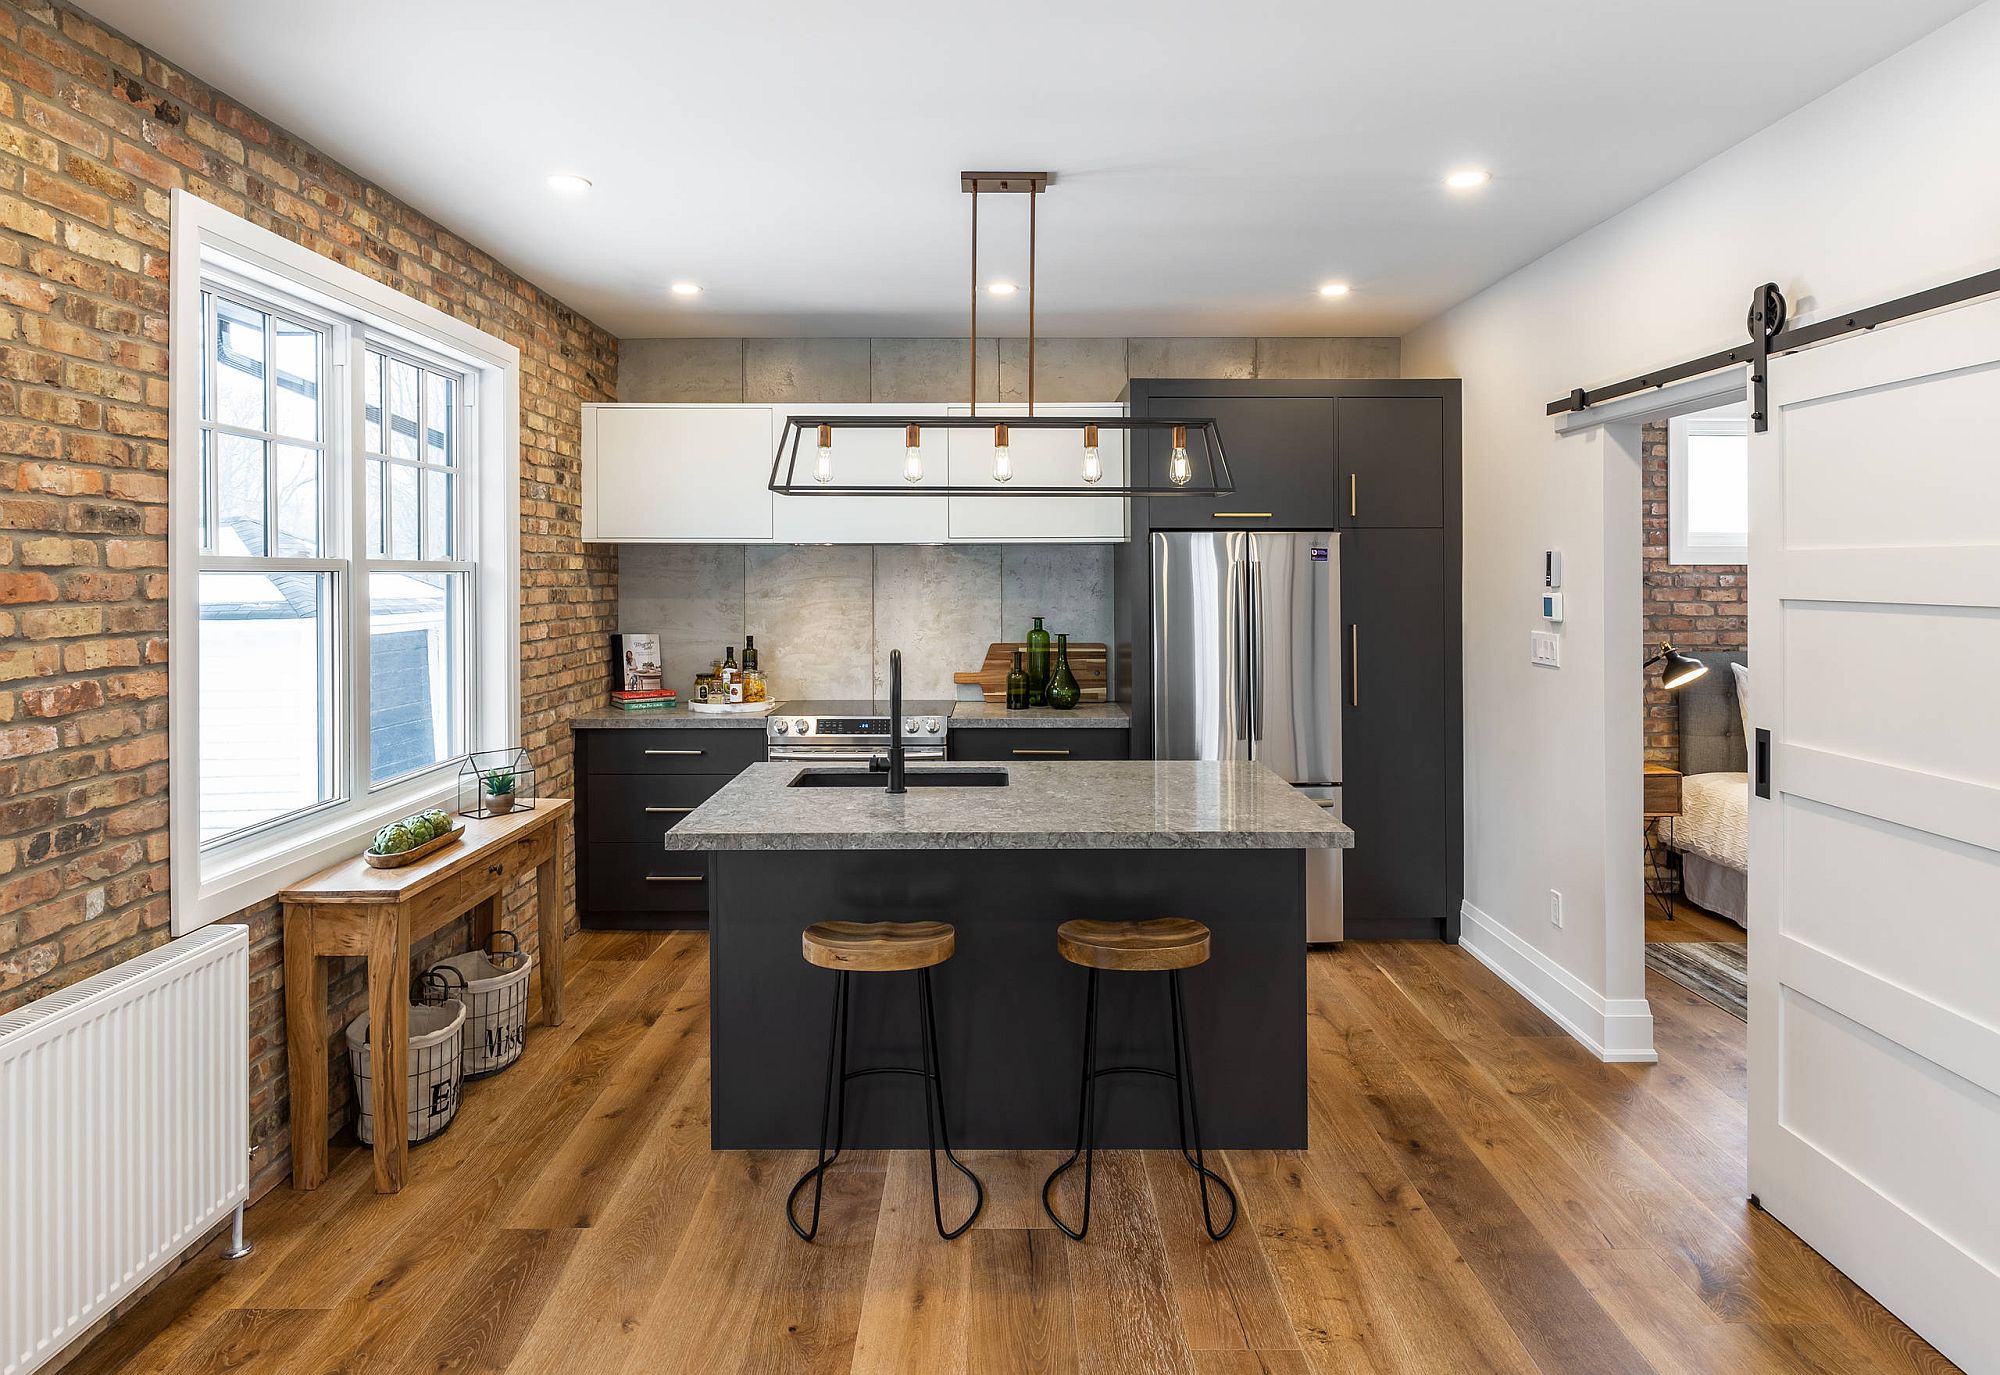 Balanced-use-of-both-modern-and-industrial-styles-in-the-modest-kitchen-with-exposed-brick-wall-90933